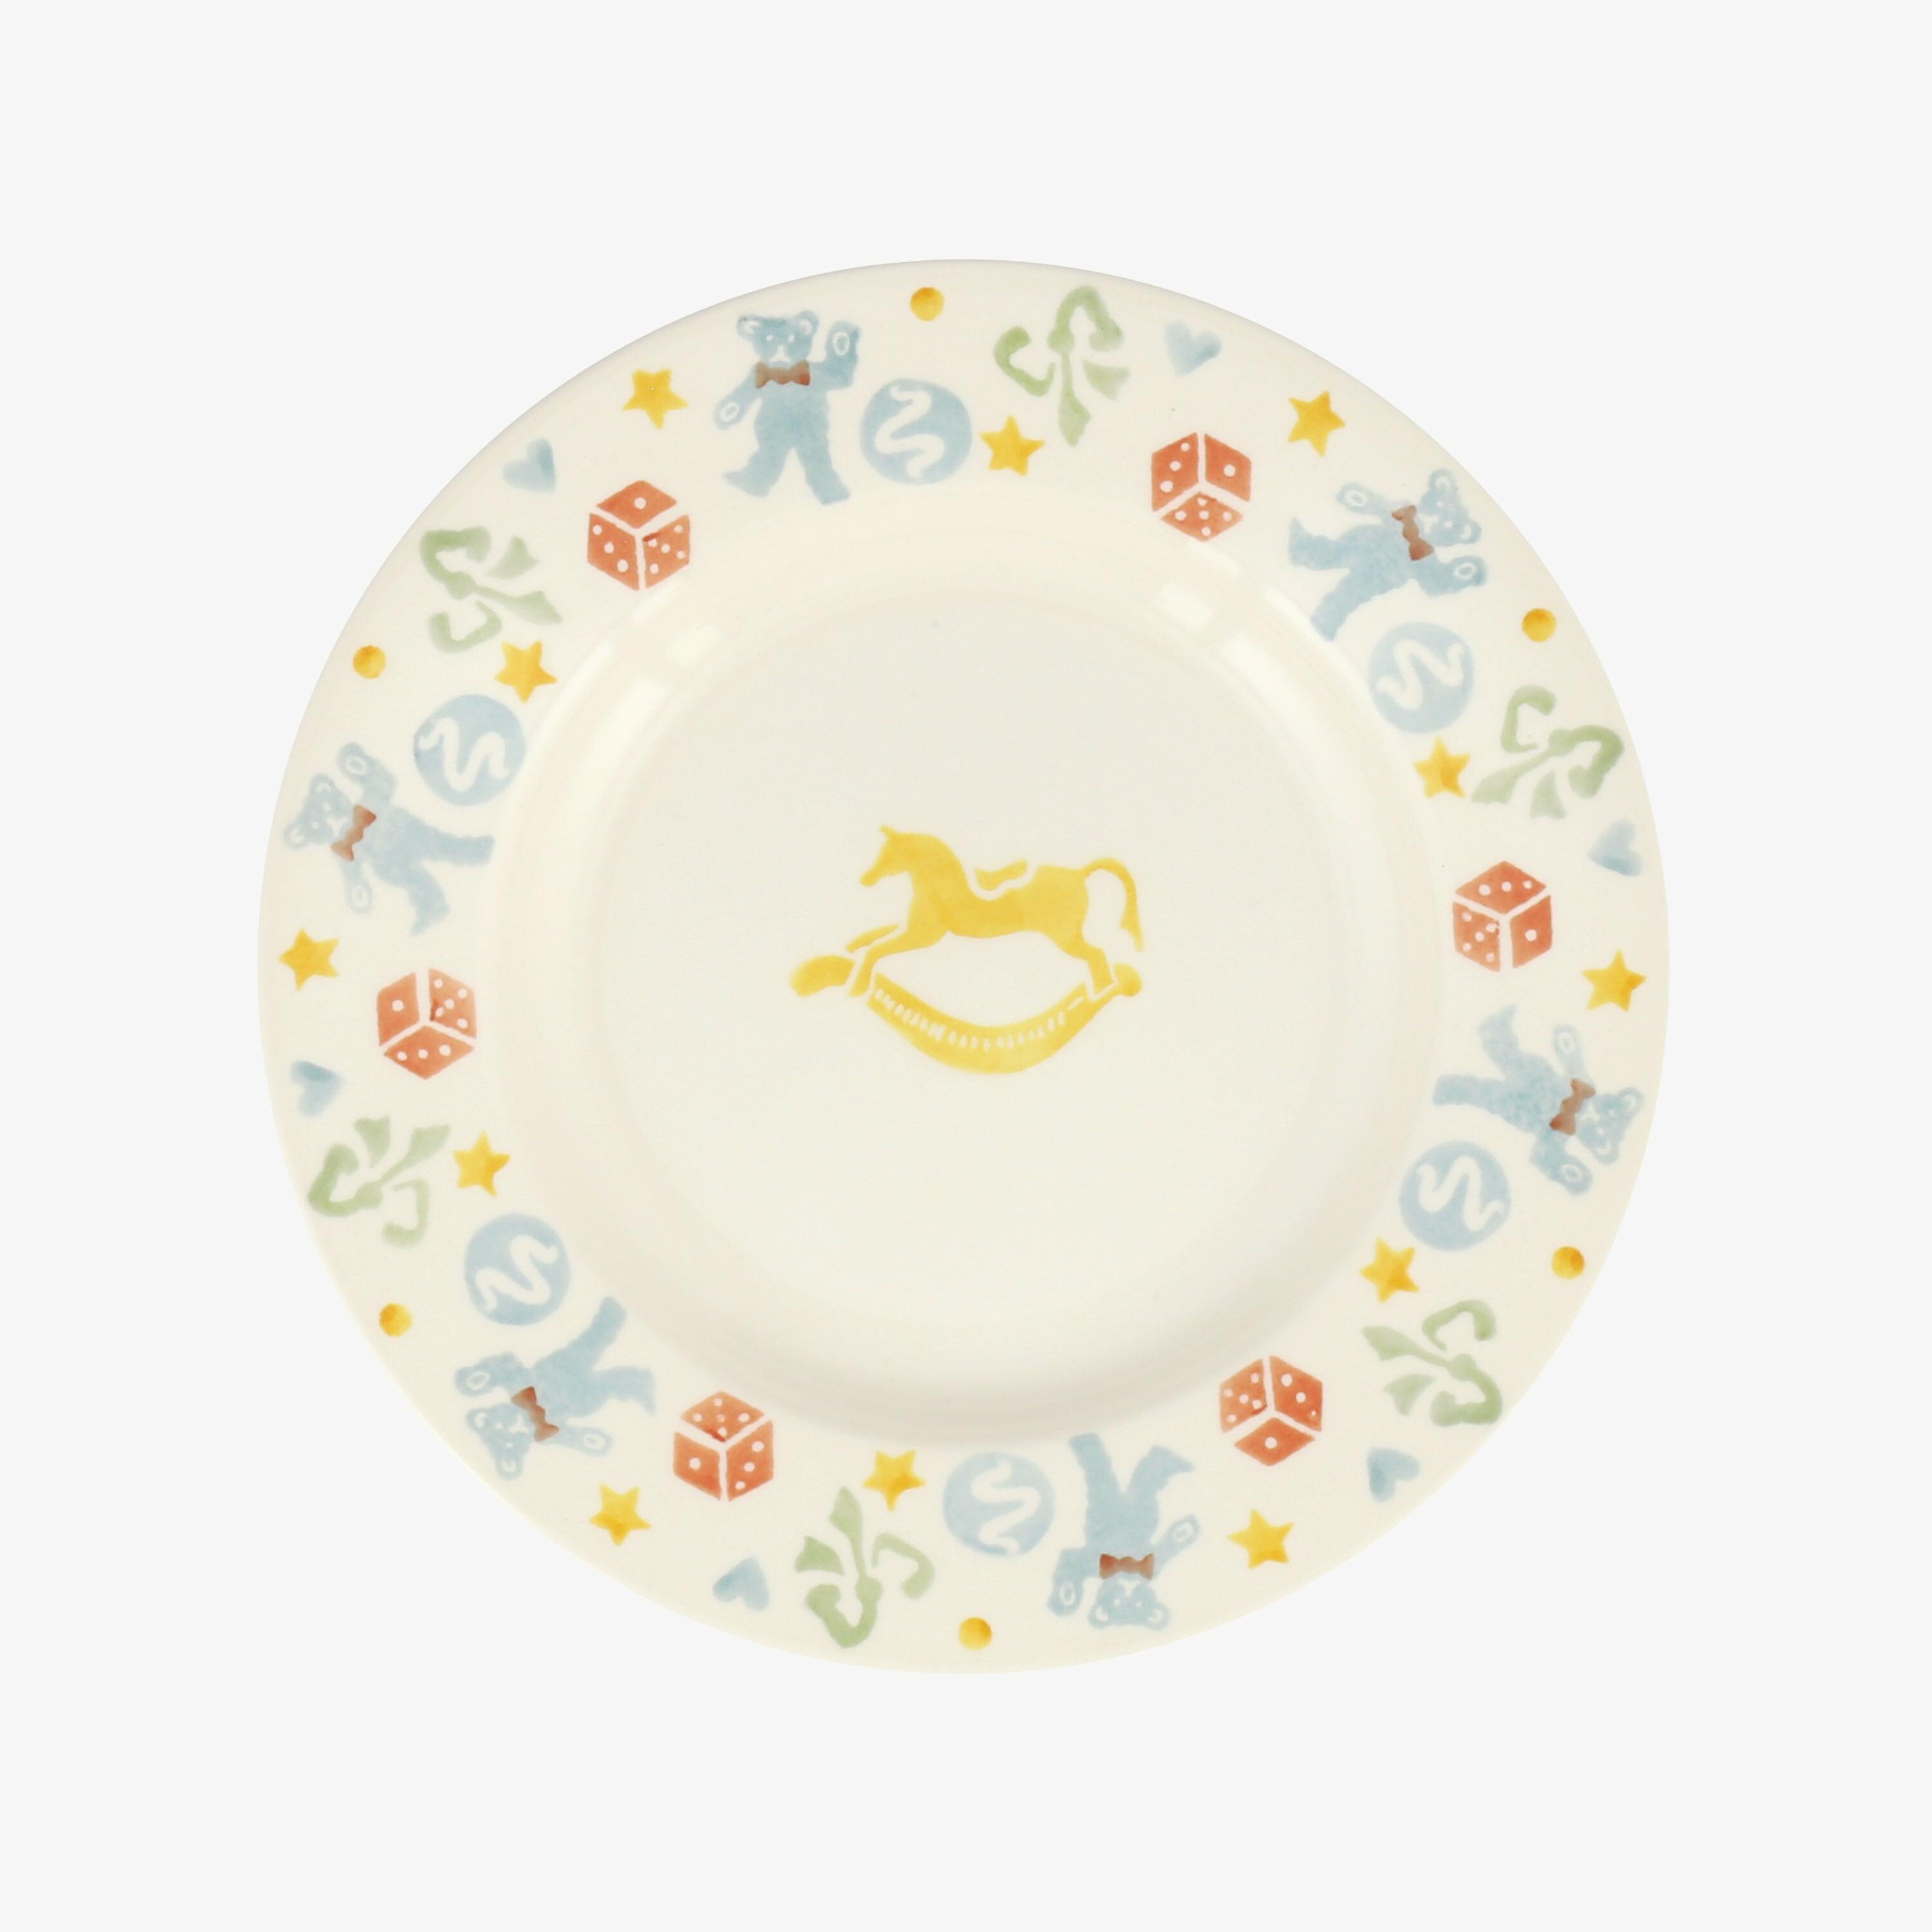 Emma Bridgewater  Seconds Toy Box 8 1/2 Inch Plate - Unique Handmade & Handpainted English Earthenware British-Made Pottery Plates